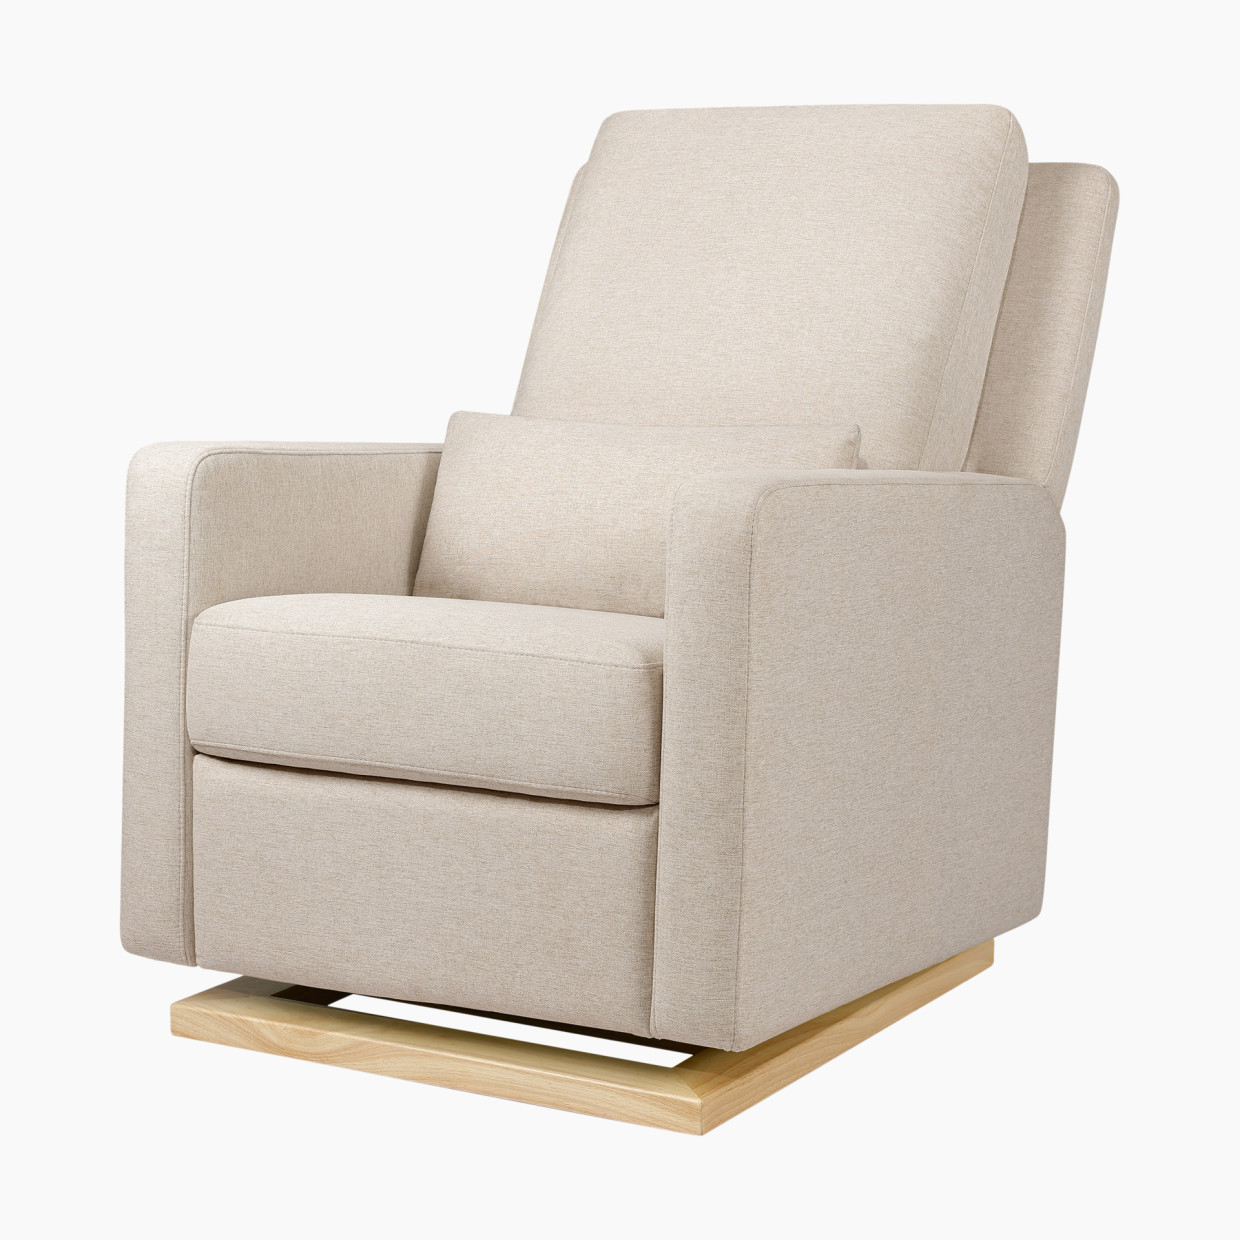 babyletto Sigi Recliner and Glider - Performance Beach Eco-Weave With Light Wood Base.